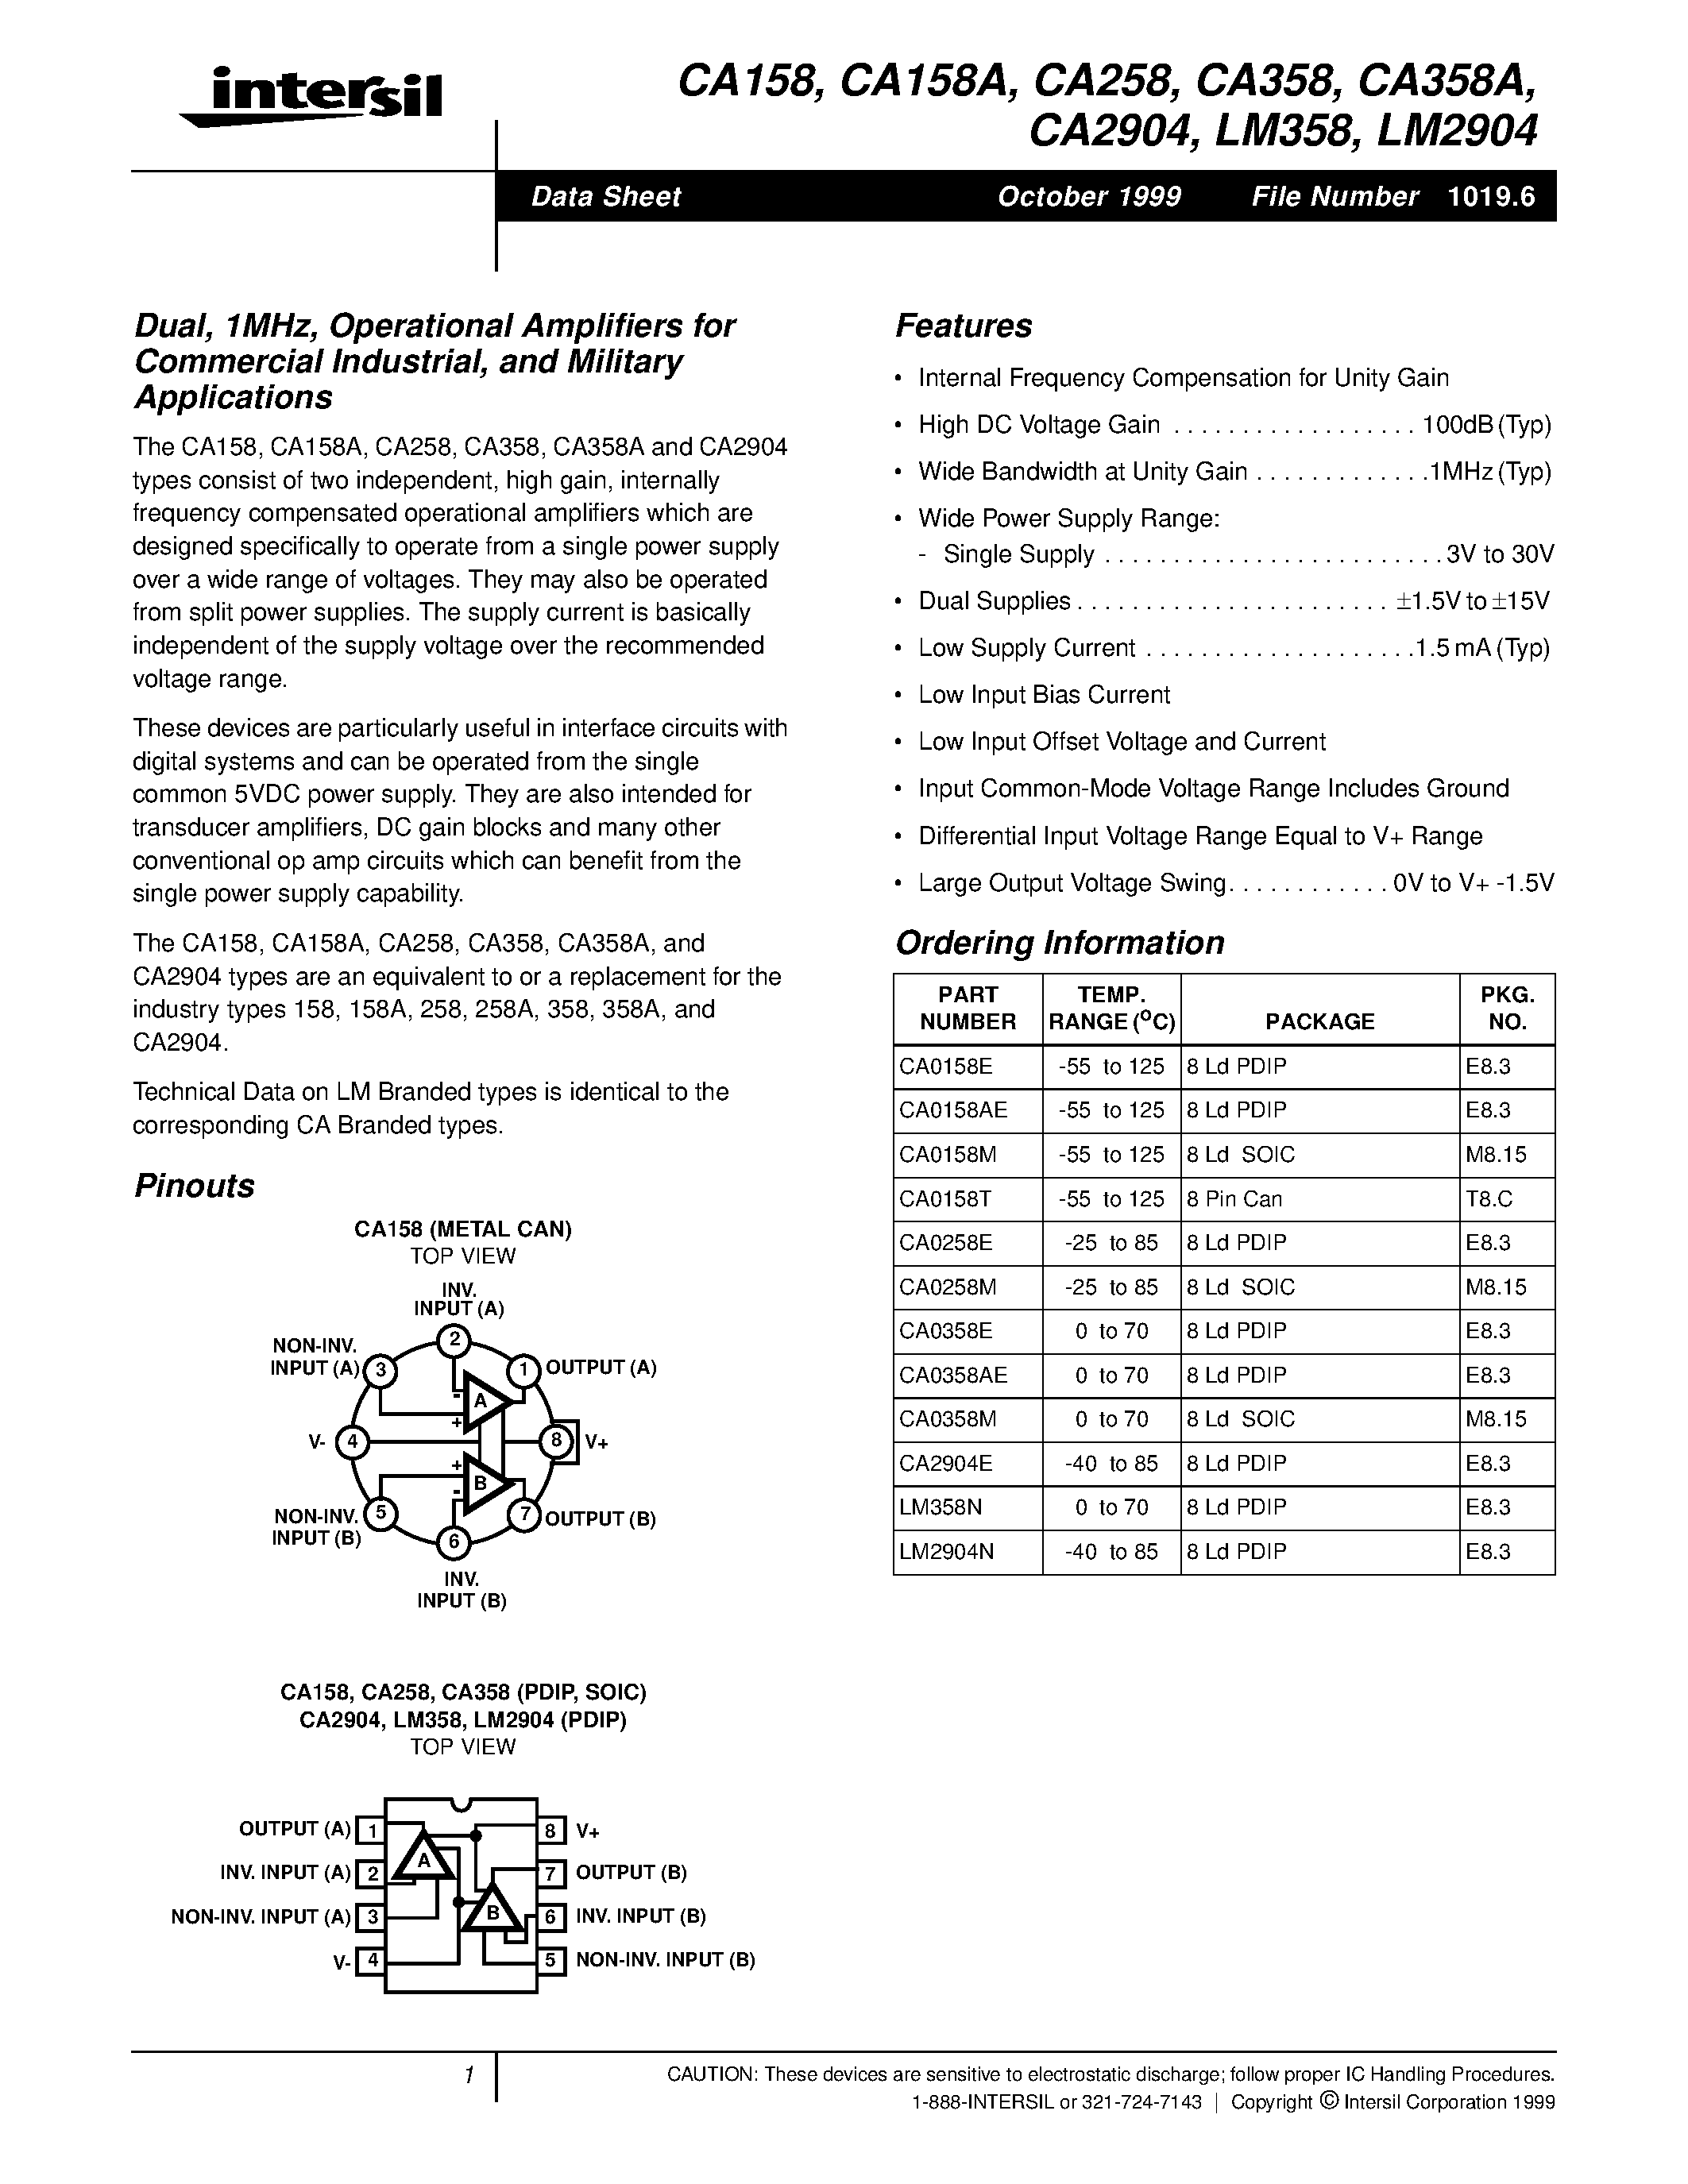 Datasheet CA258 - Operational Amplifiers page 1